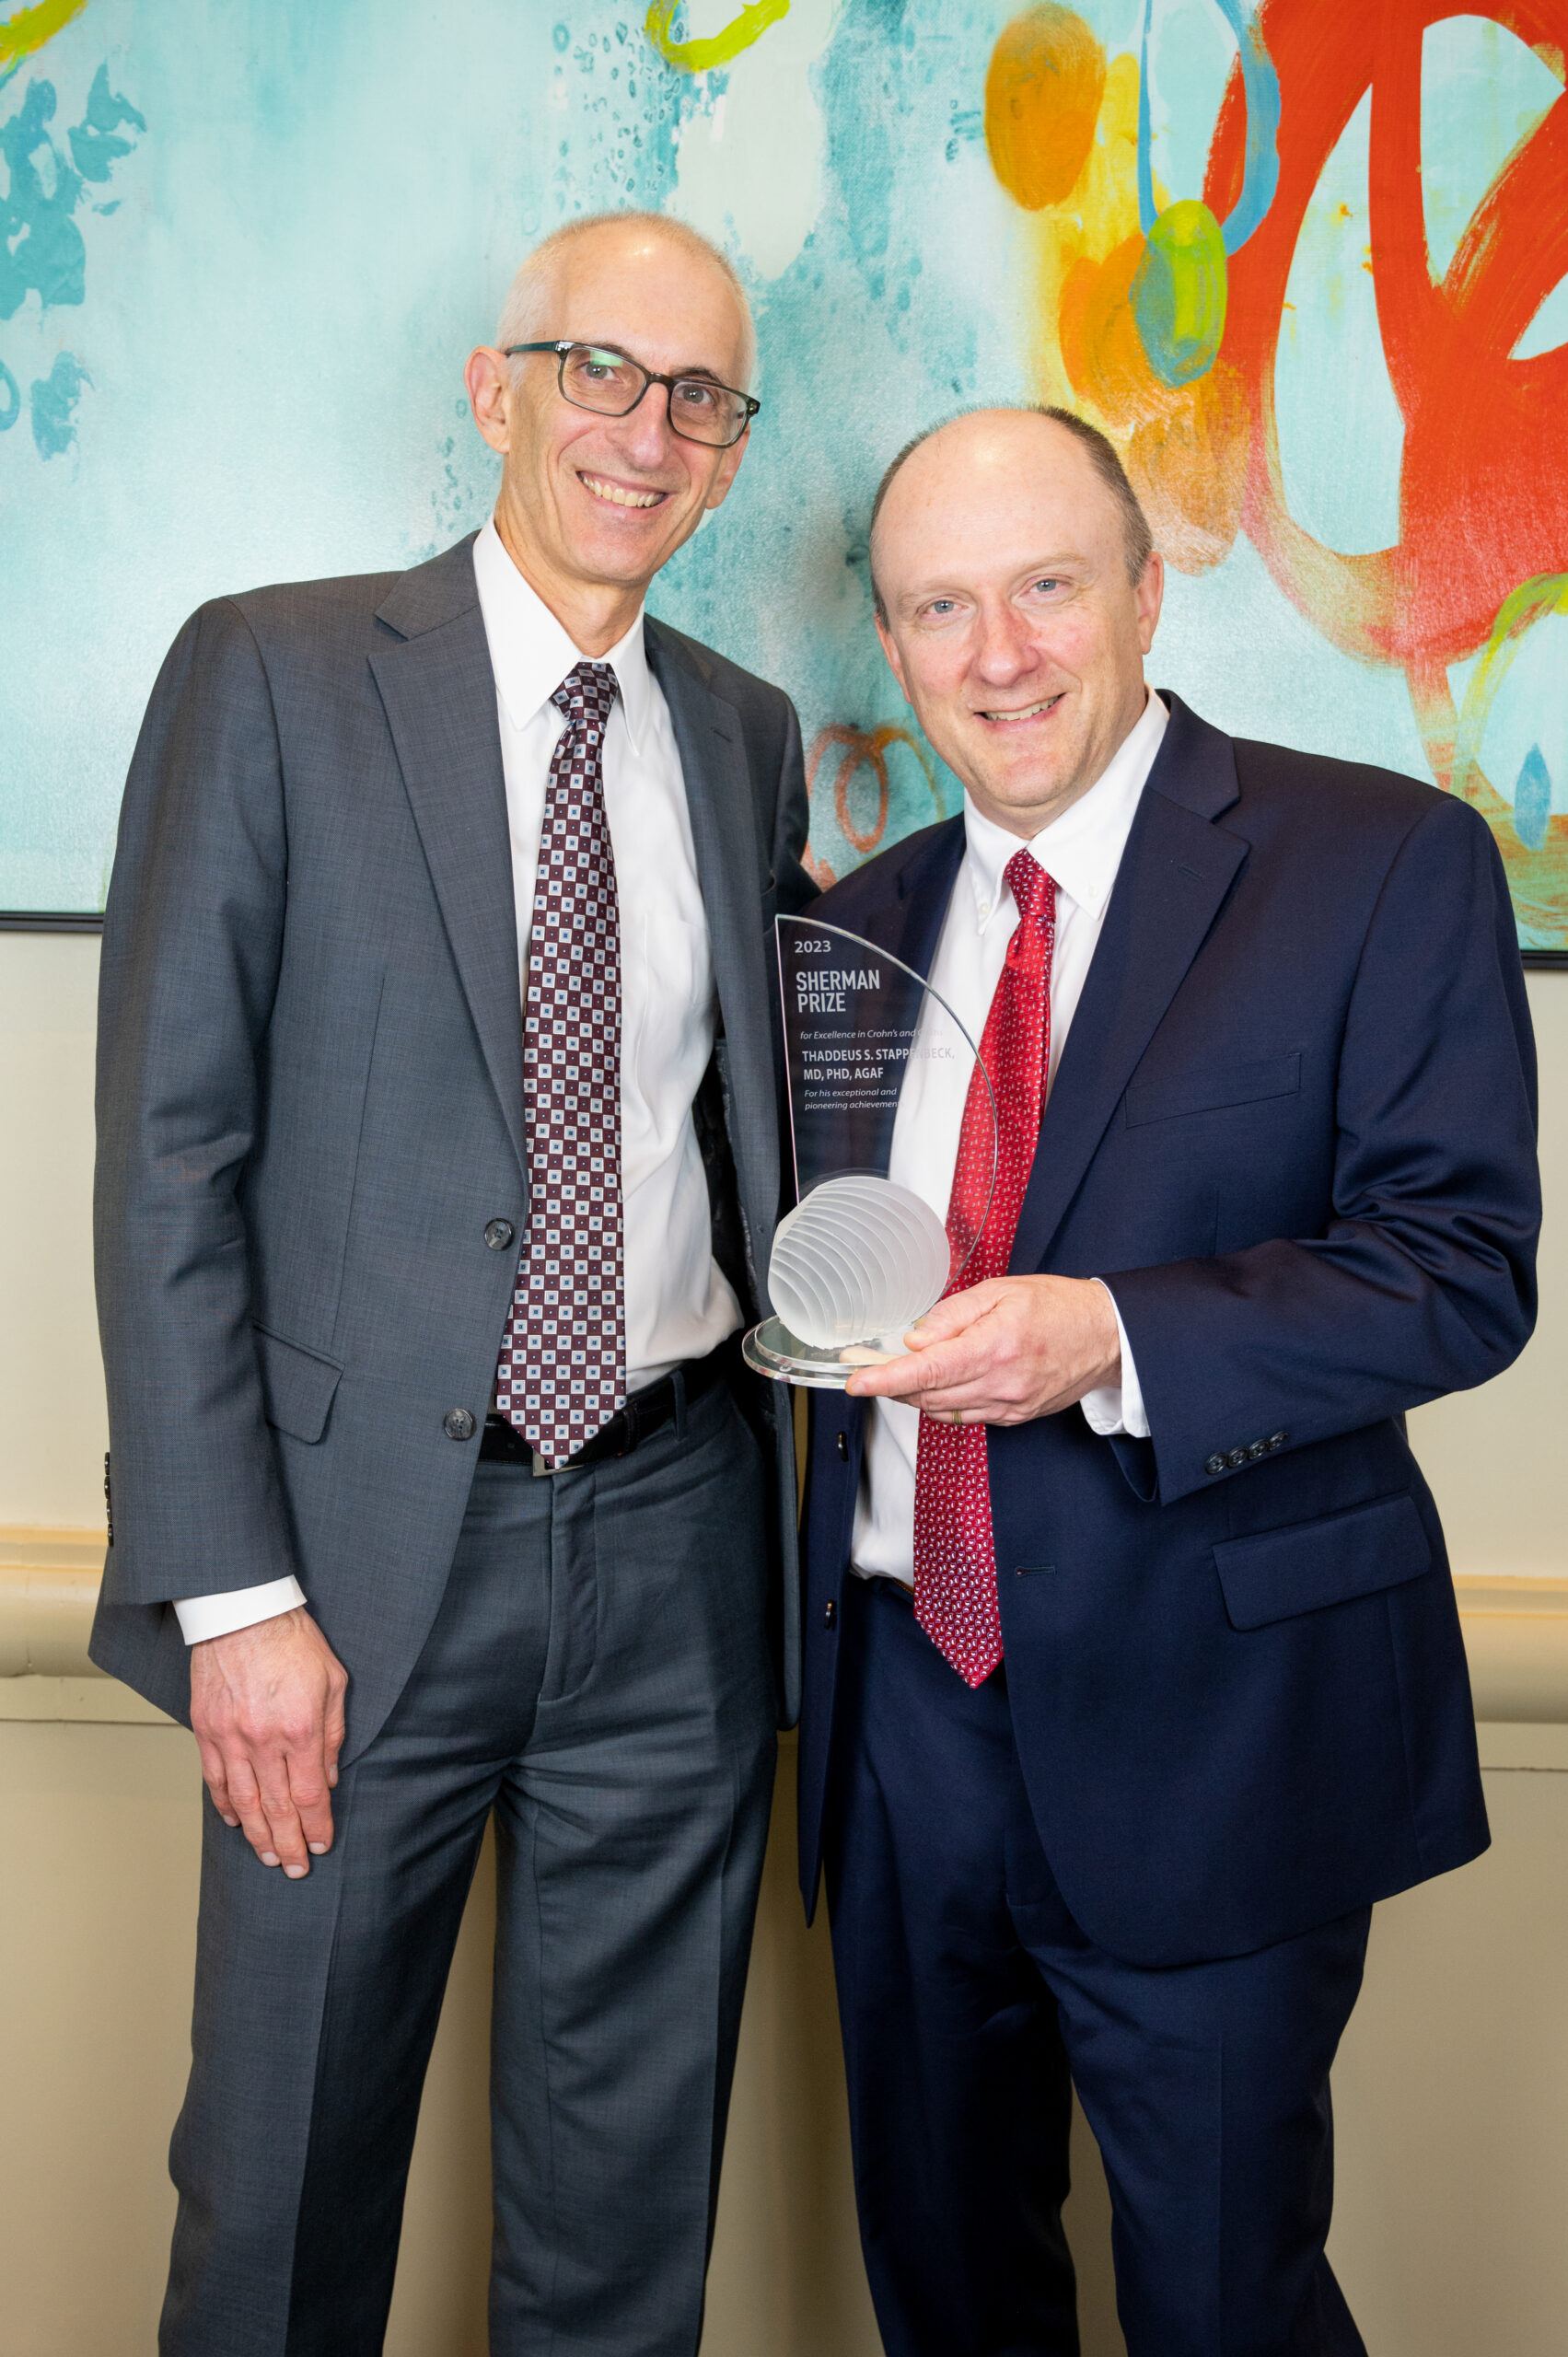 <p>2023 Sherman Prize Recipient Thaddeus S. Stappenbeck, MD, PhD and 2023 Selection Committee Member James D. Lewis, MD, MSCE</p>
